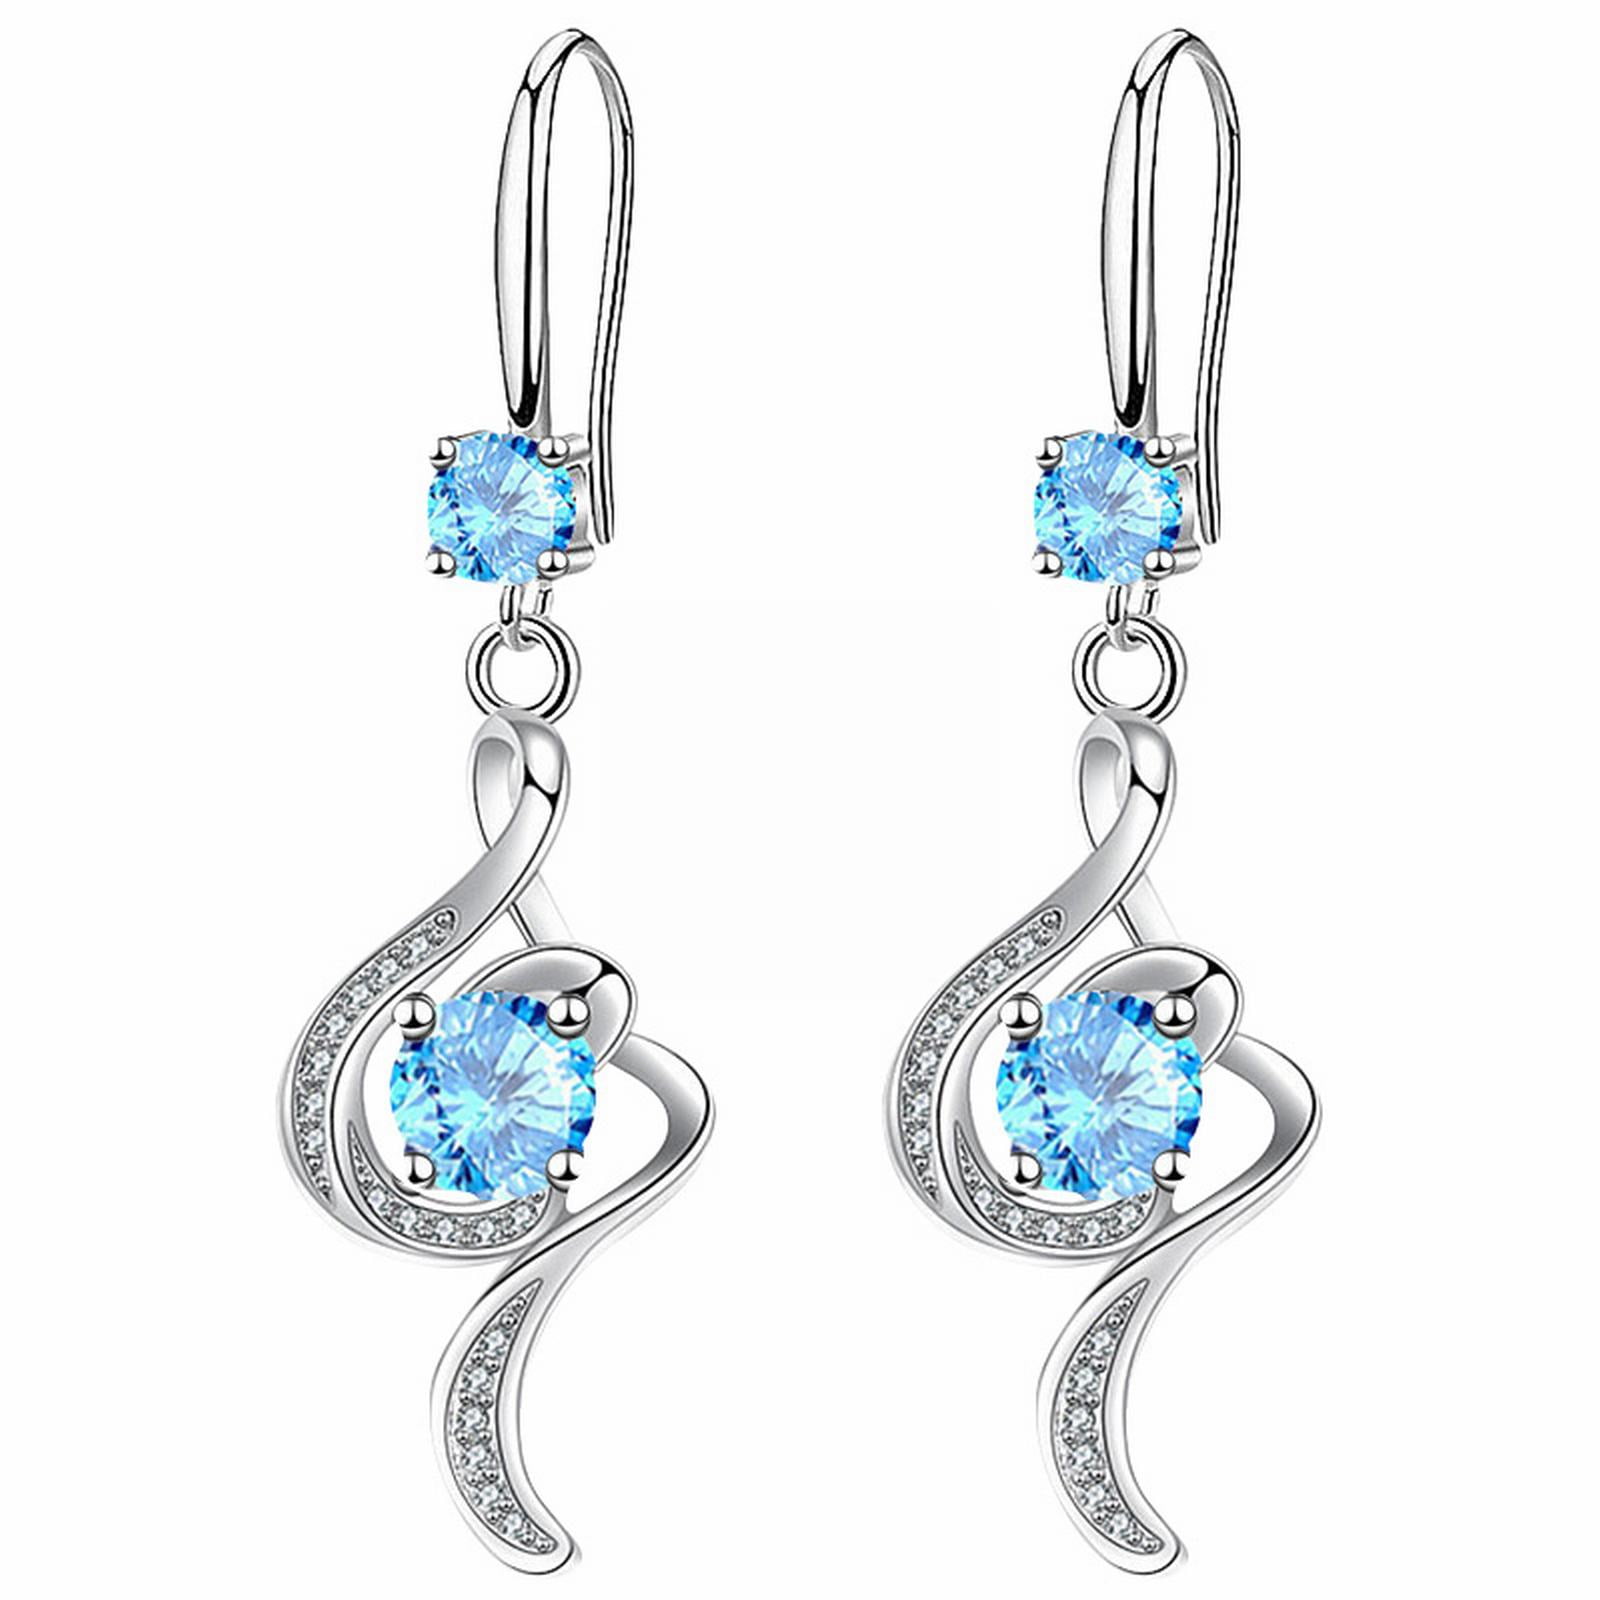 Round Diamond Drop Earrings | Ouros Jewels